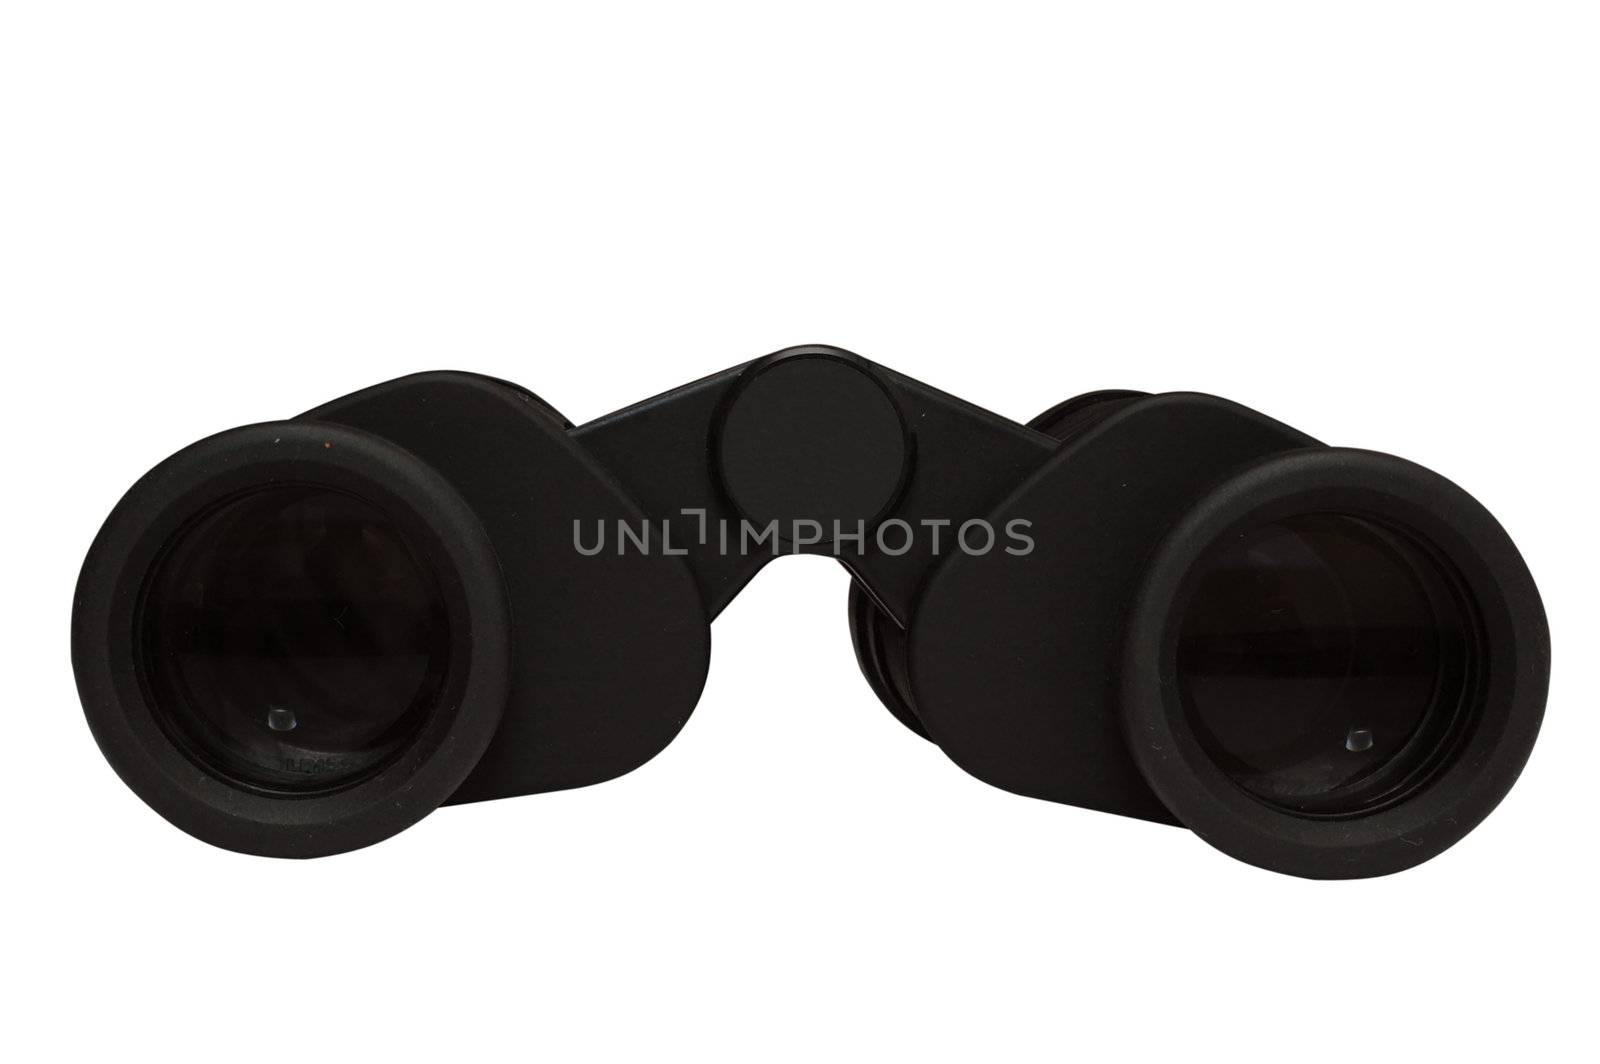 Binoculars.  Isolated with clipping path.